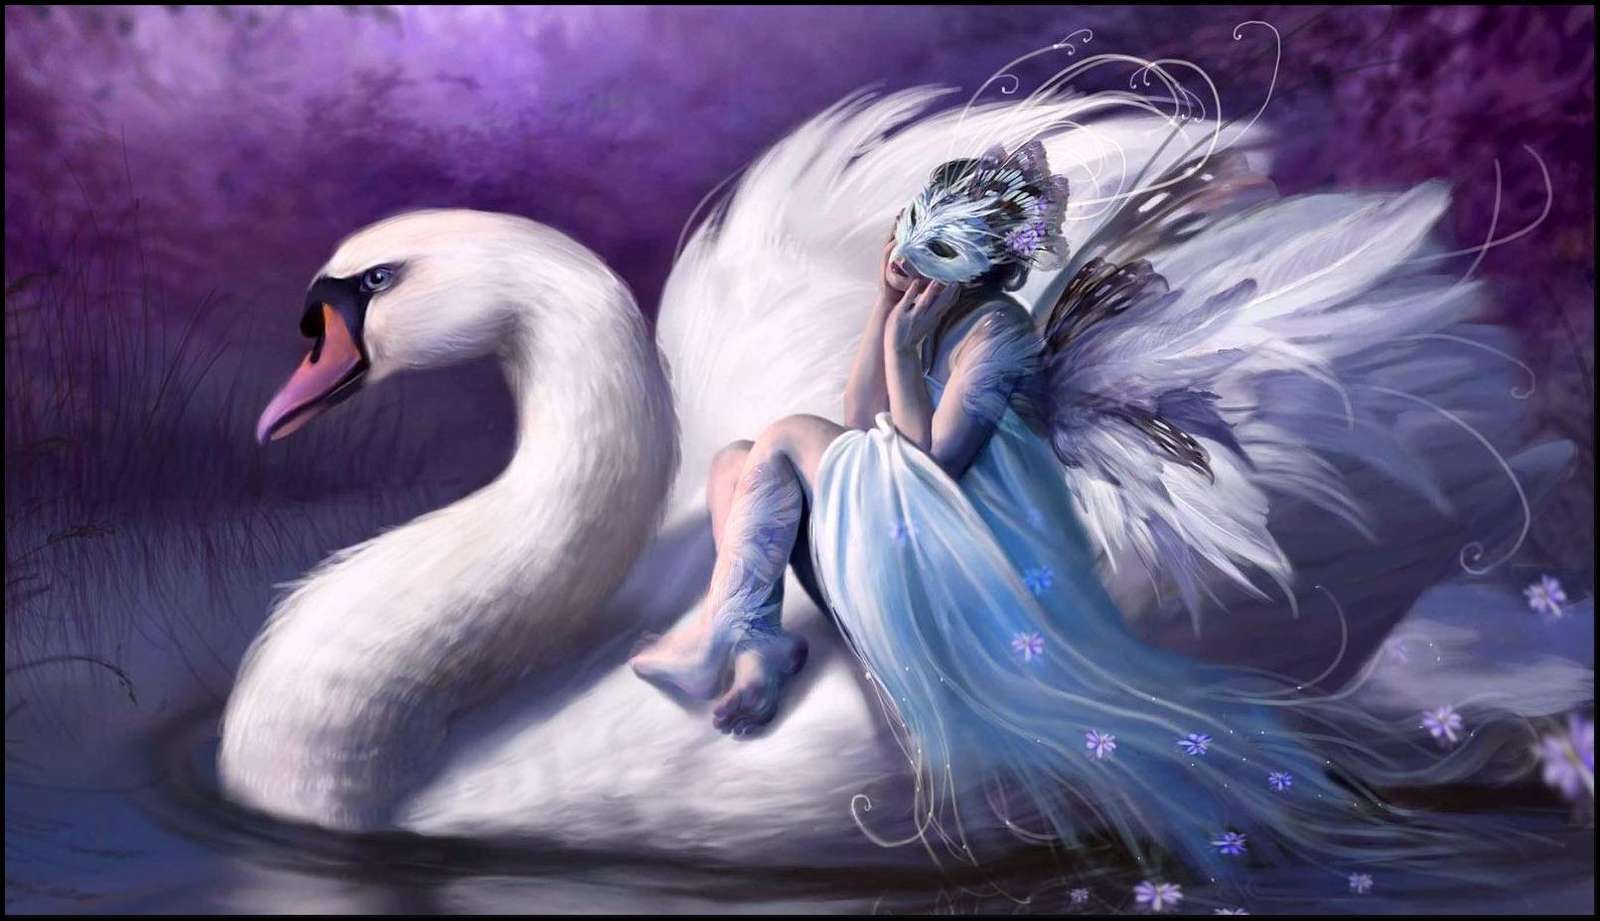 Girl and swan online puzzle